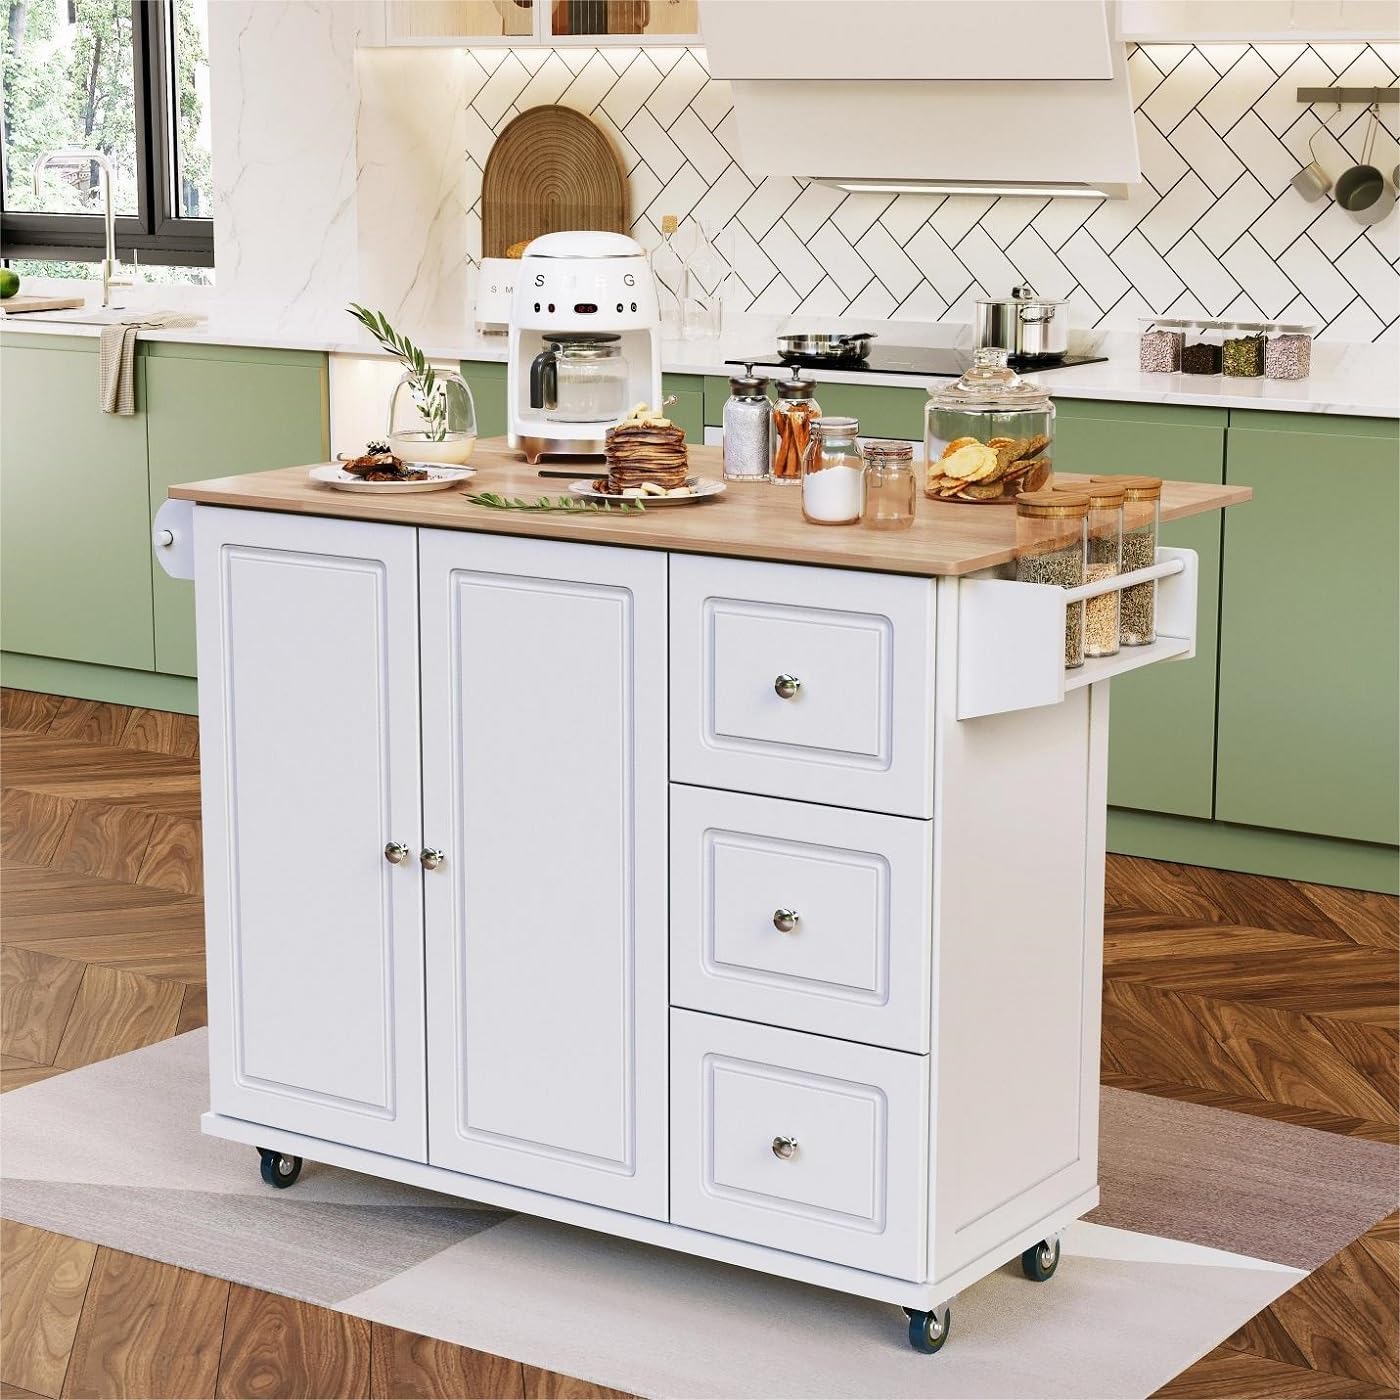 MFSTUDIO Rolling Kitchen Island on Wheels with Drop-Leaf, Mobile Kitchen Island Cart with 3 Drawers Storage Cabinet, Wood Countertop, Adjustable Shelf, Towel Bar and Spice Rack for Dining Room, White